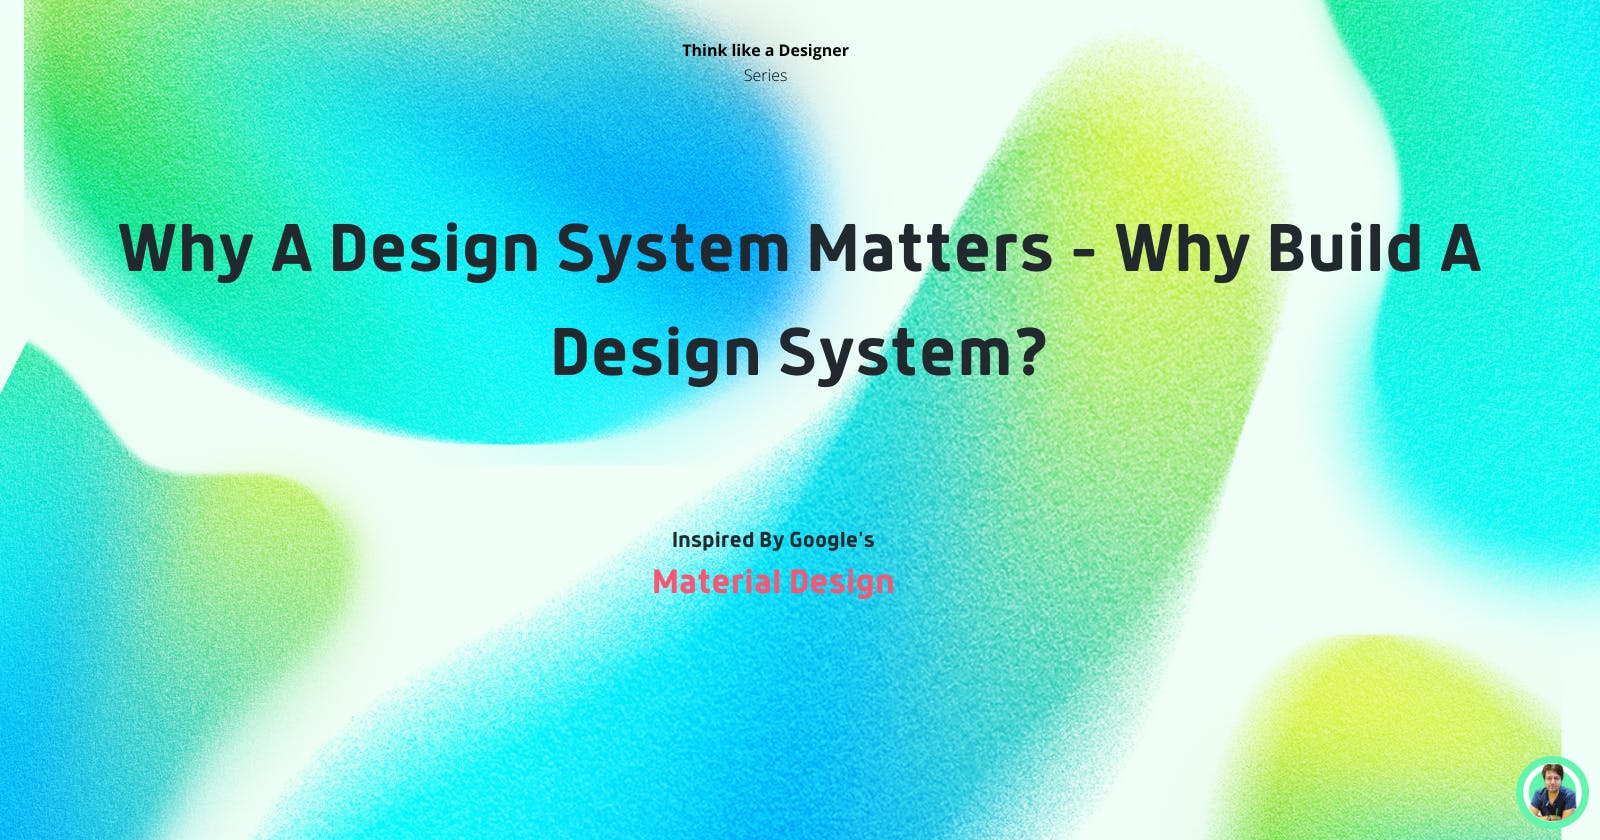 Why A Design System Matters - Why Build A Design System?